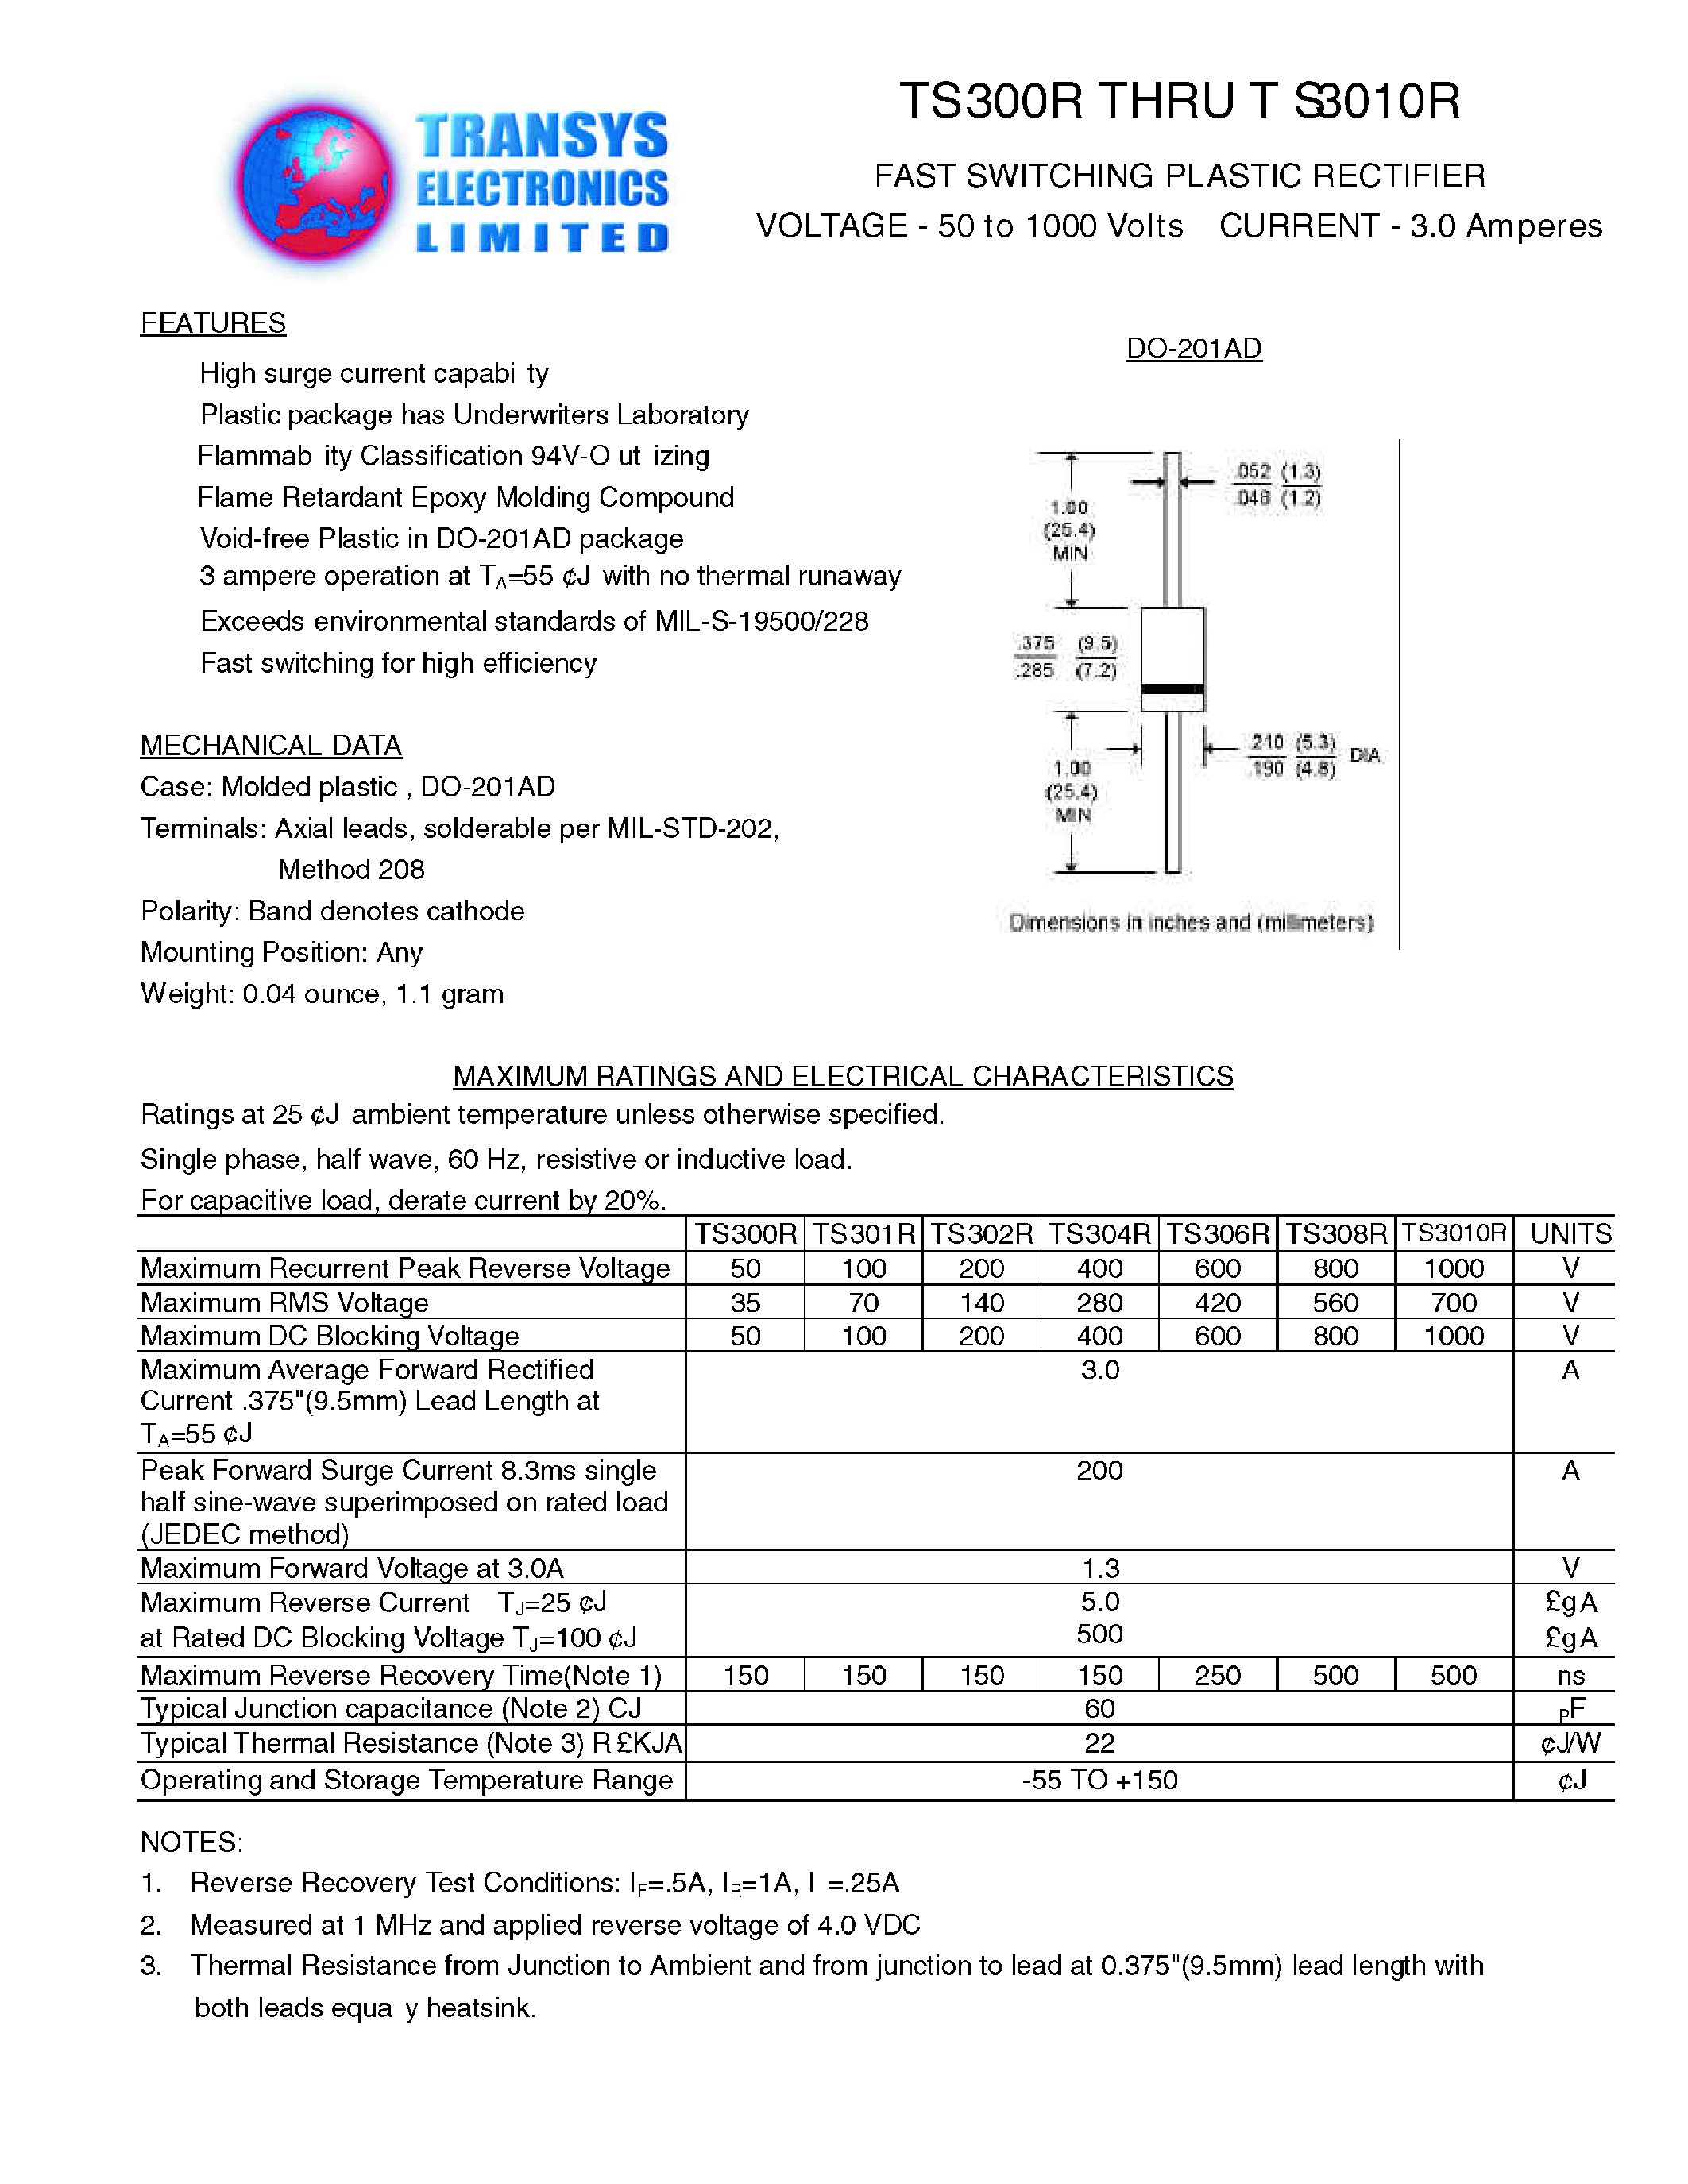 Datasheet TS306R - FAST SWITCHING PLASTIC RECTIFIER page 1